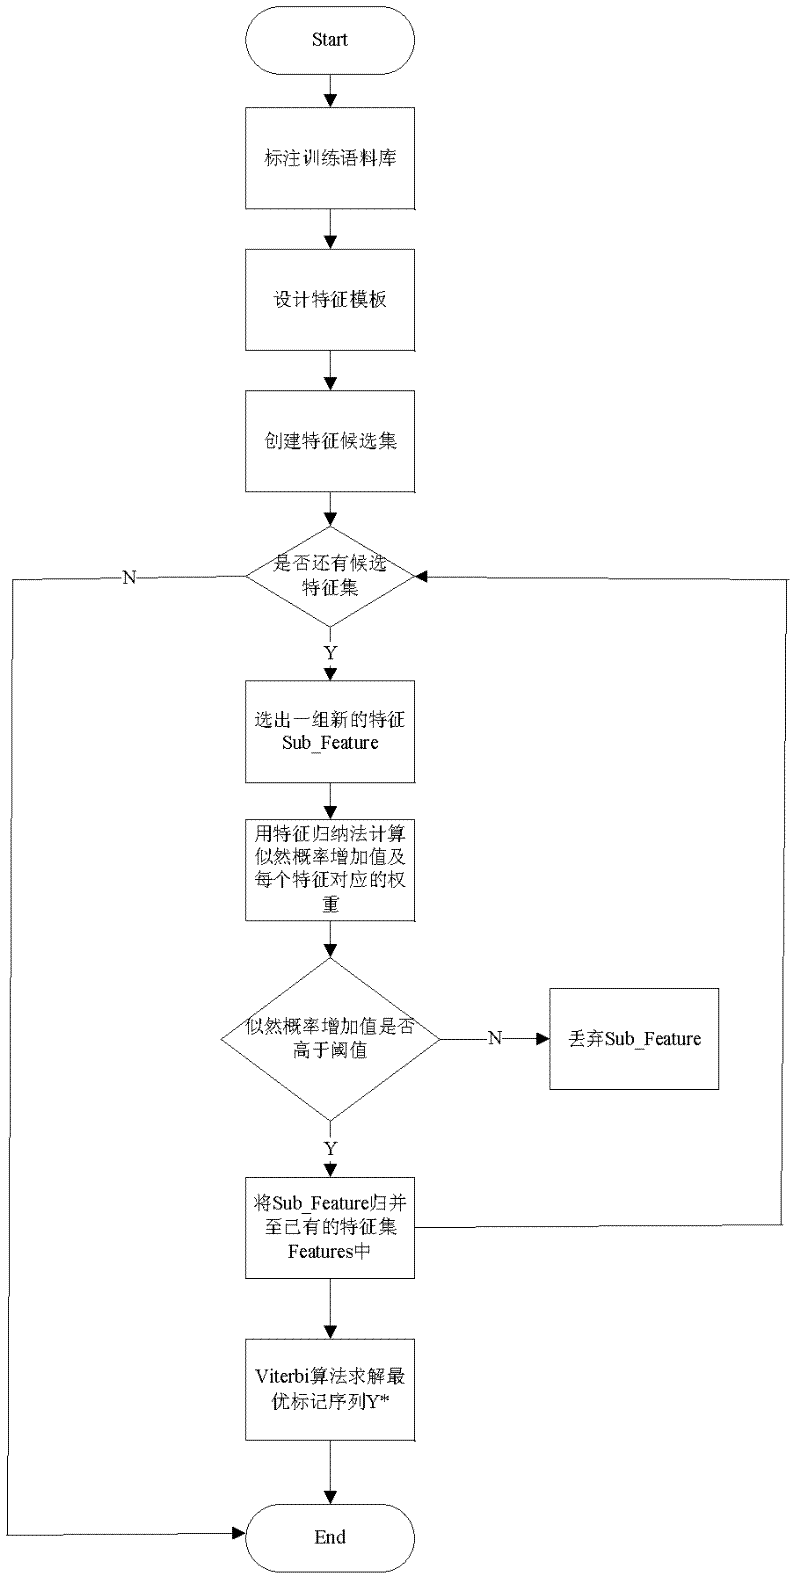 Recognition ambiguity resolution method of Chinese named entity